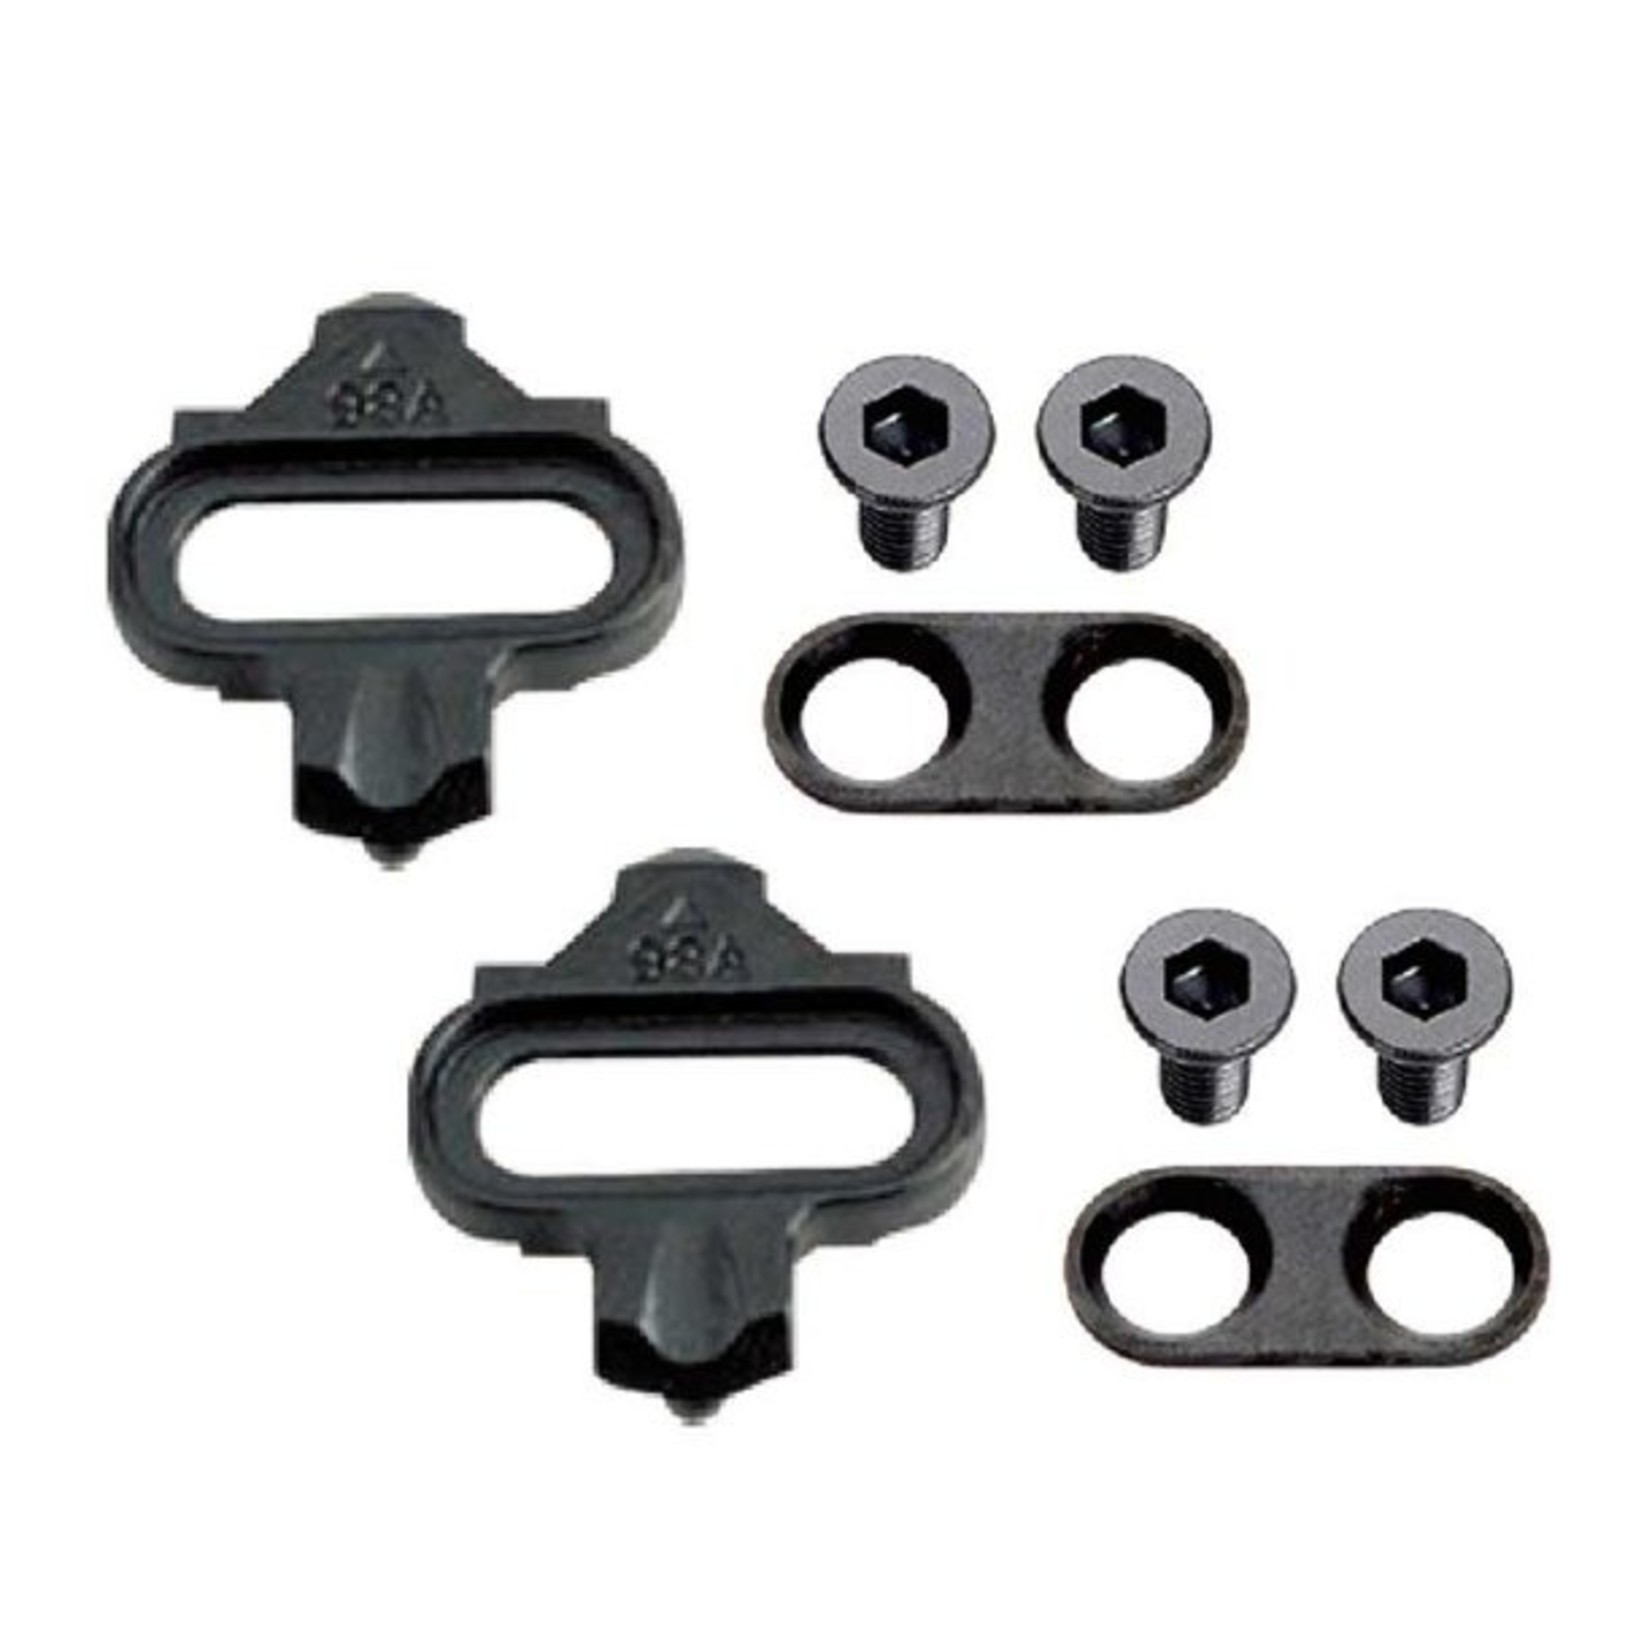 Eclypse Eclypse, 98A, Cleats, Shimano SPD compatible, Hardware included, Display card